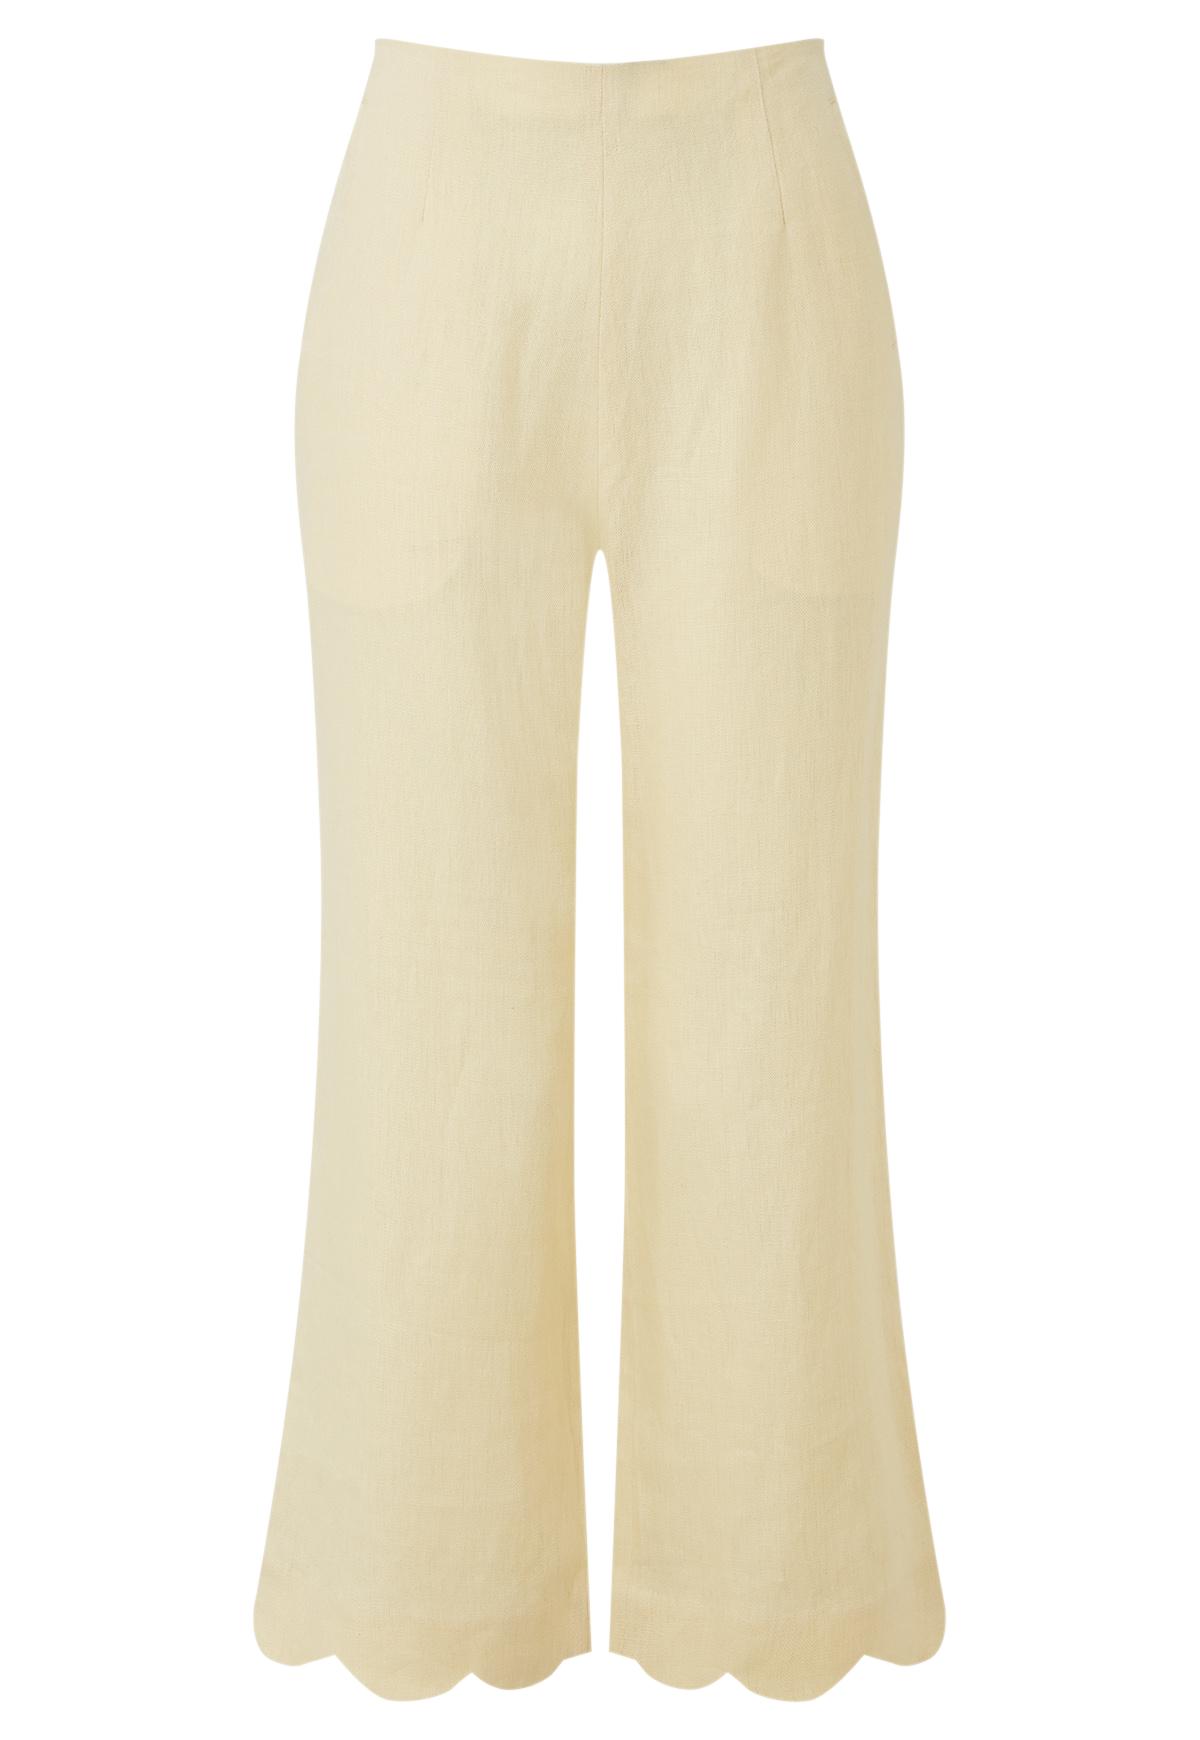 THE SCALLOP PANT in BUTTER YELLOW LINEN